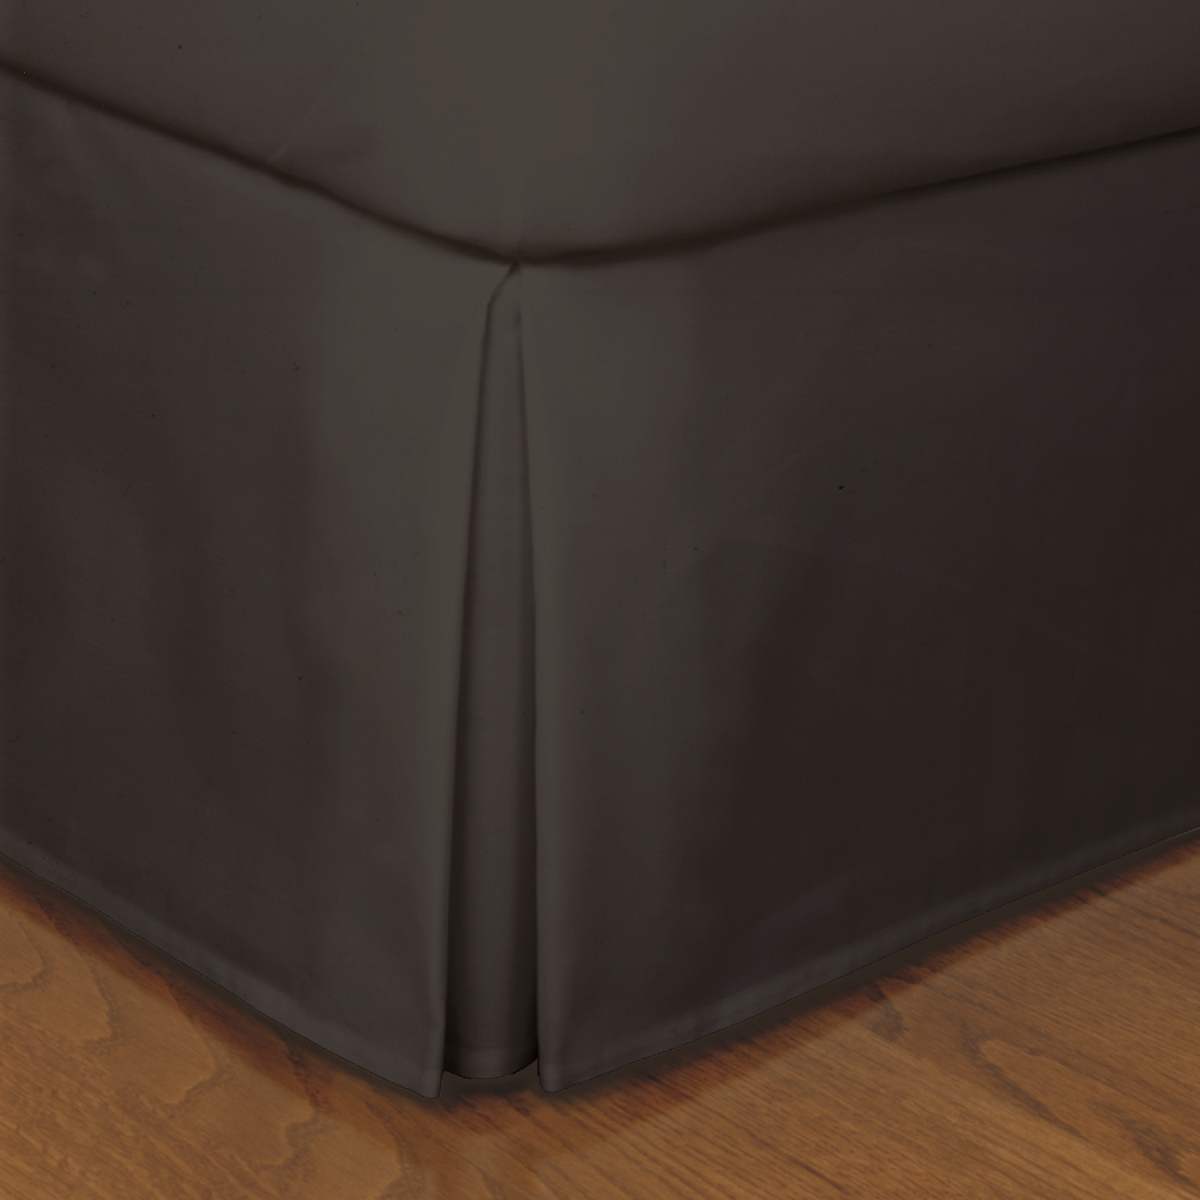 Fre23614blac03 14 In. Microfiber Bed Skirts Black - Queen